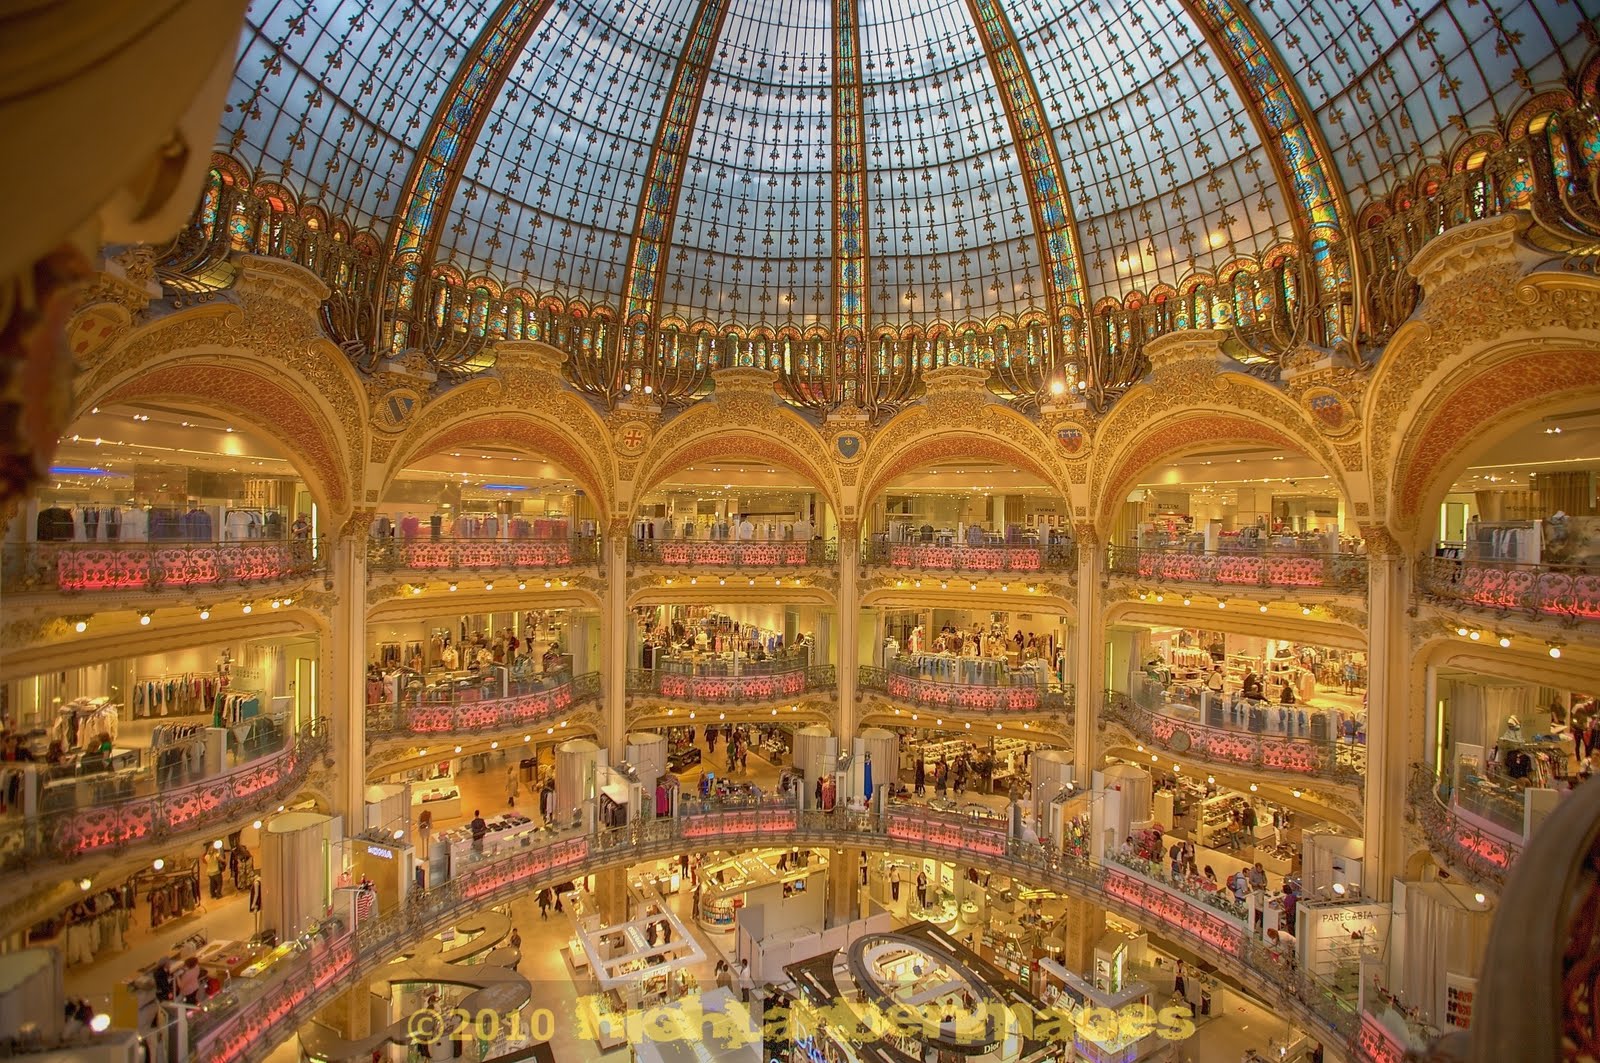 a-blogography-of-photography-galeries-lafayette